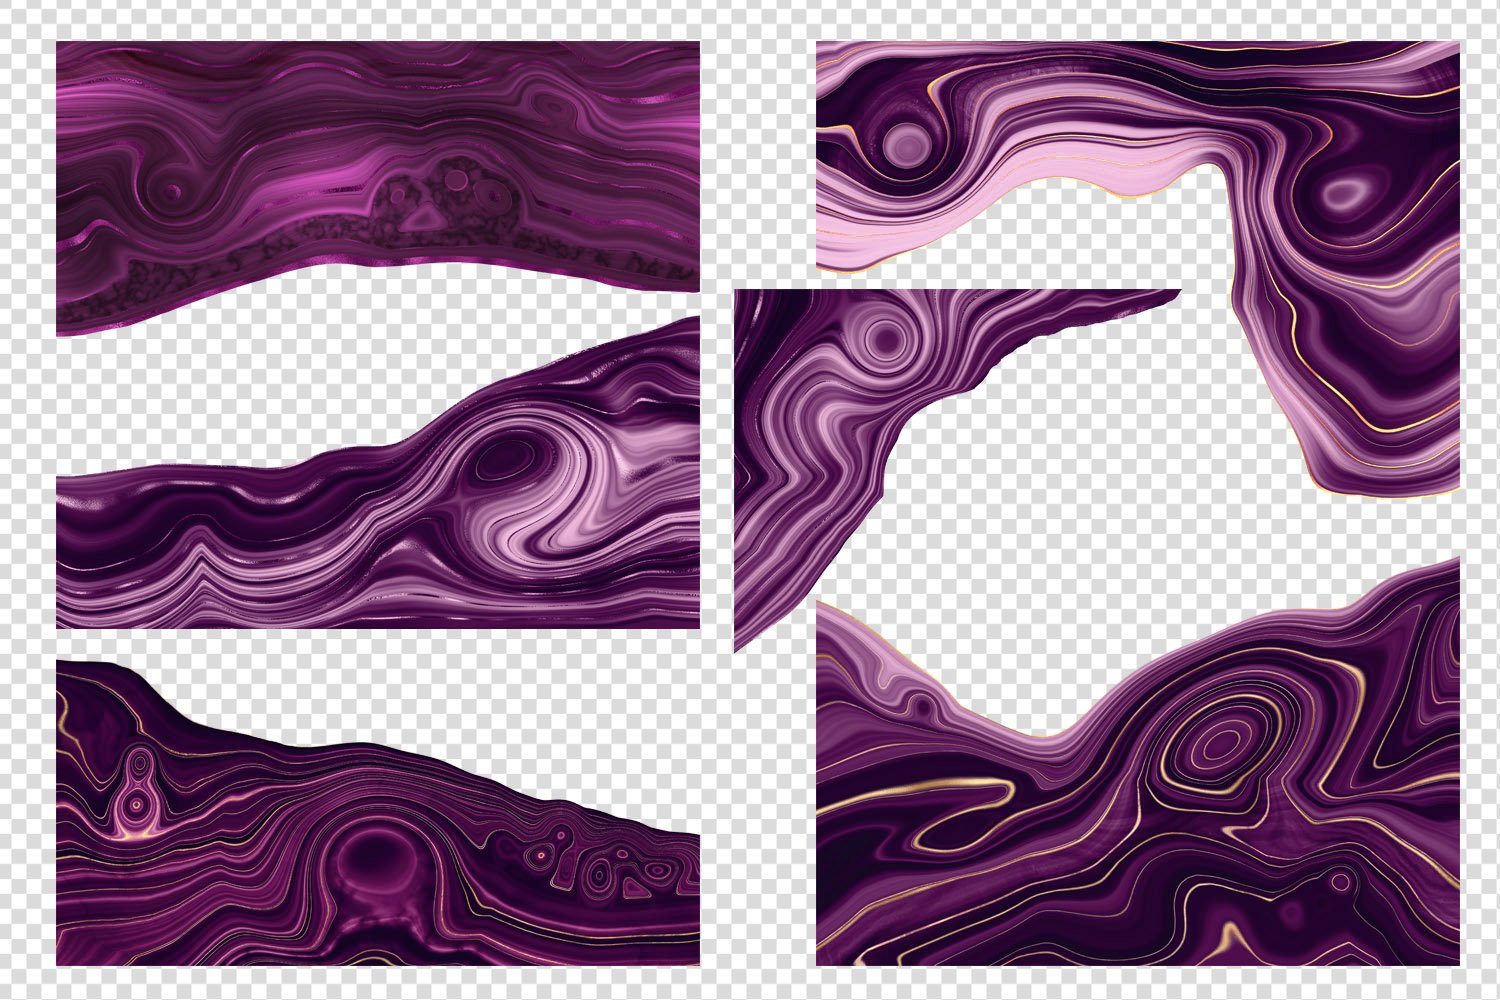 Strata Amethyst Purple Agate preview image.